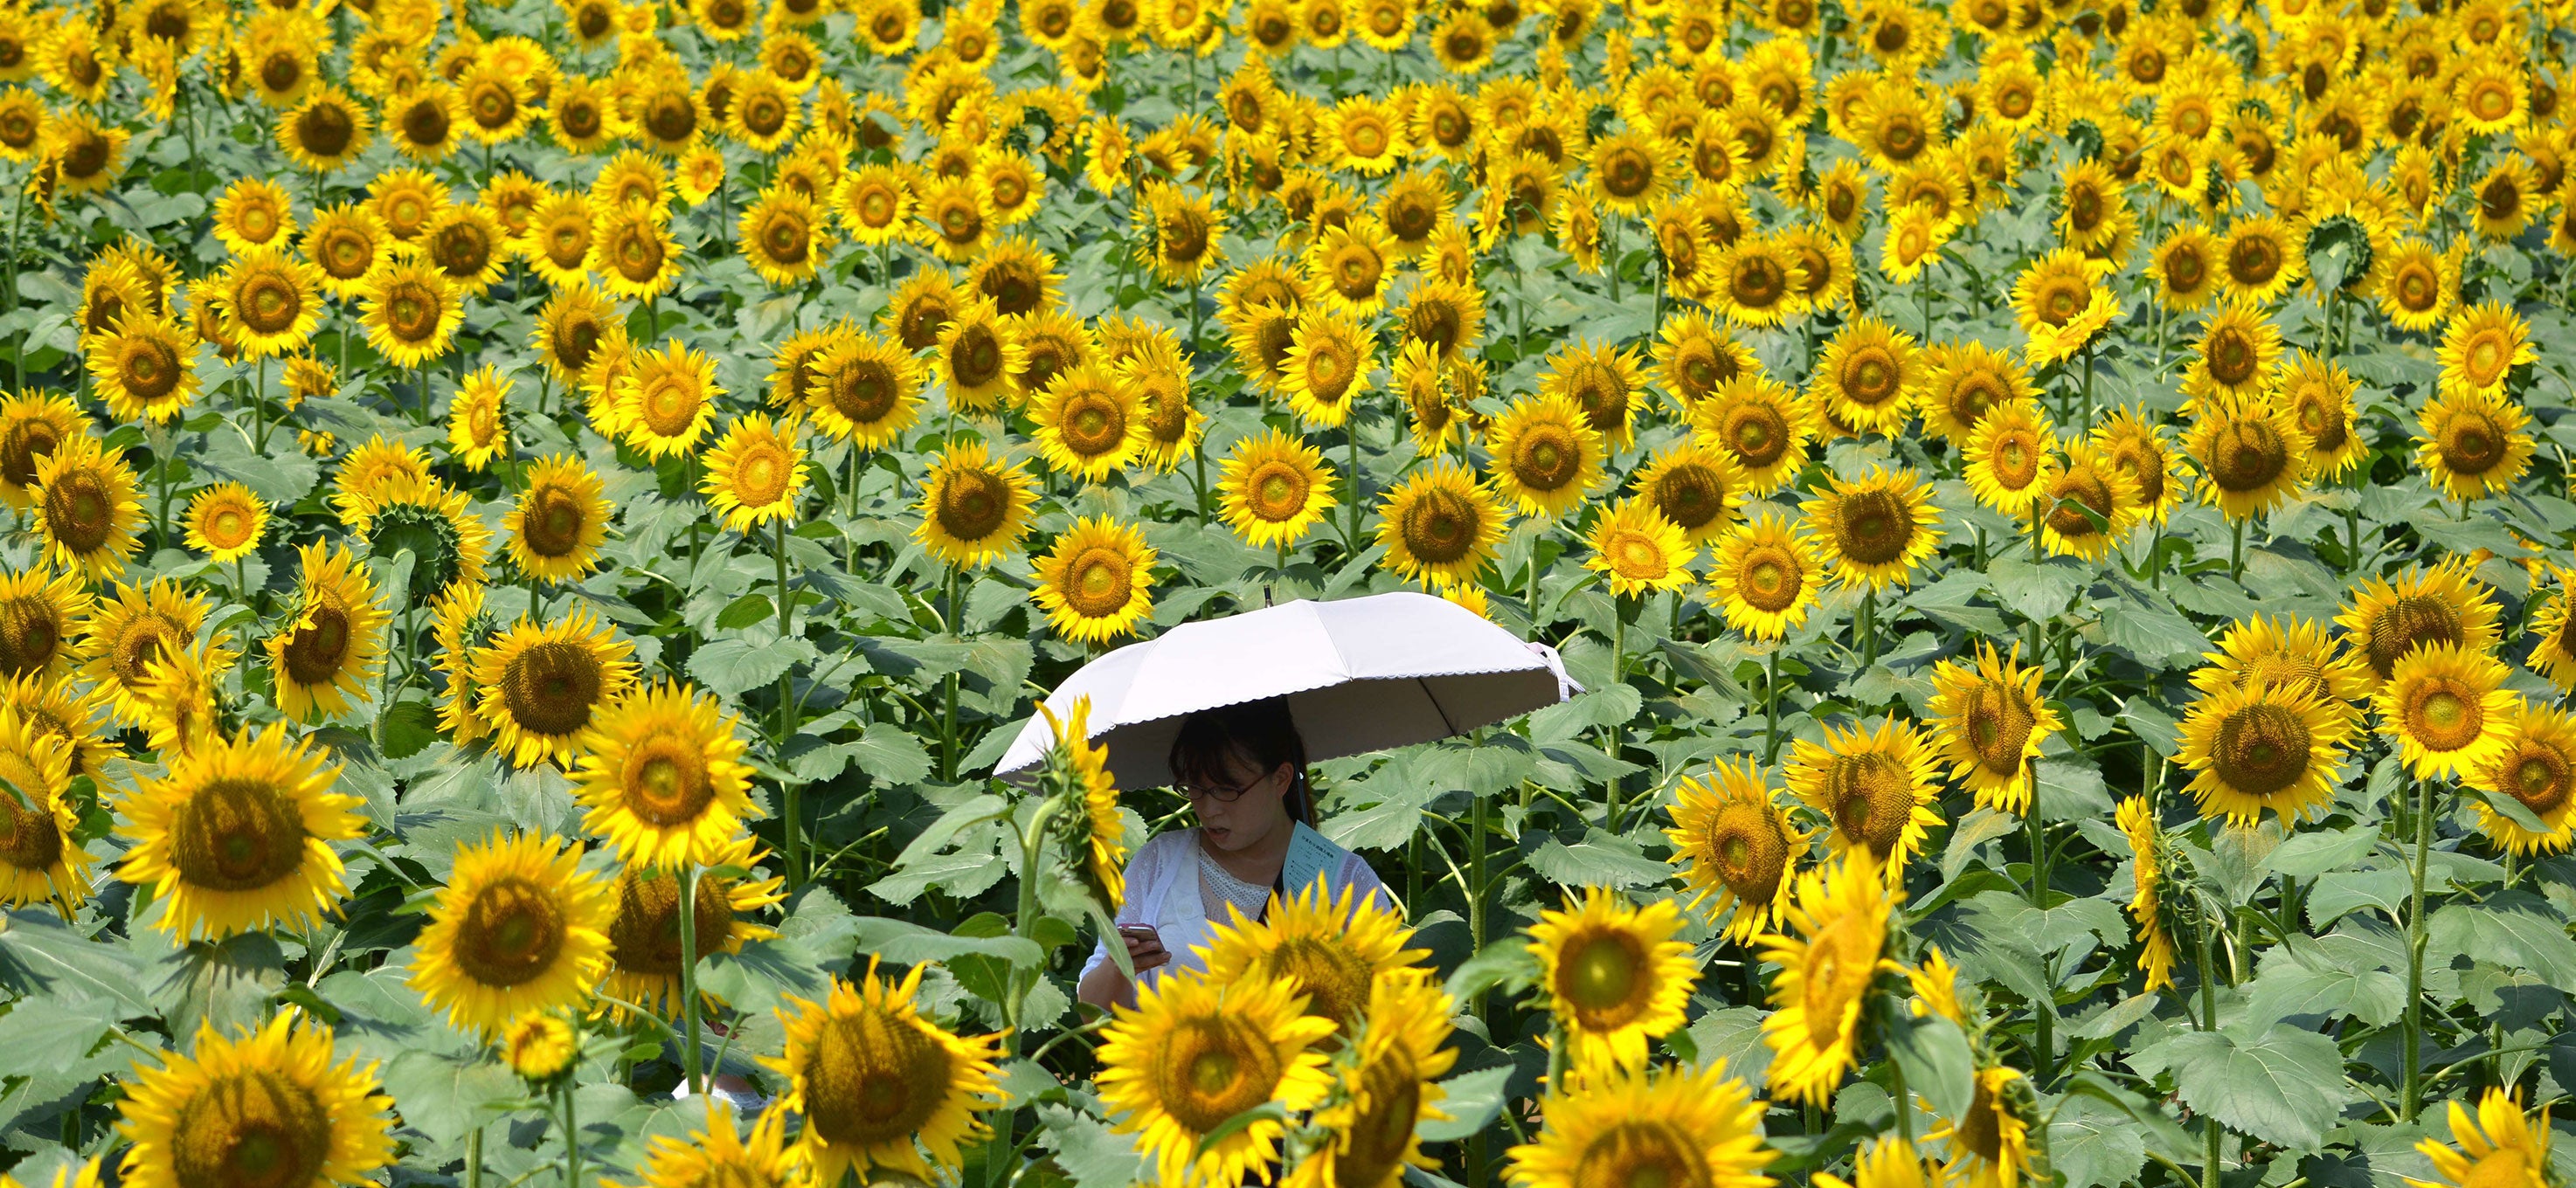 A woman walks through a maze of sunflowers growing in a field during a three-day sunflower festival in the town of Nogi, Tochigi prefecture, some 70 kms north of Tokyo on July 27, 2014. A total of some 200,000 sunflowers welcomed guests for the summer festival, an annual draw for the small town.